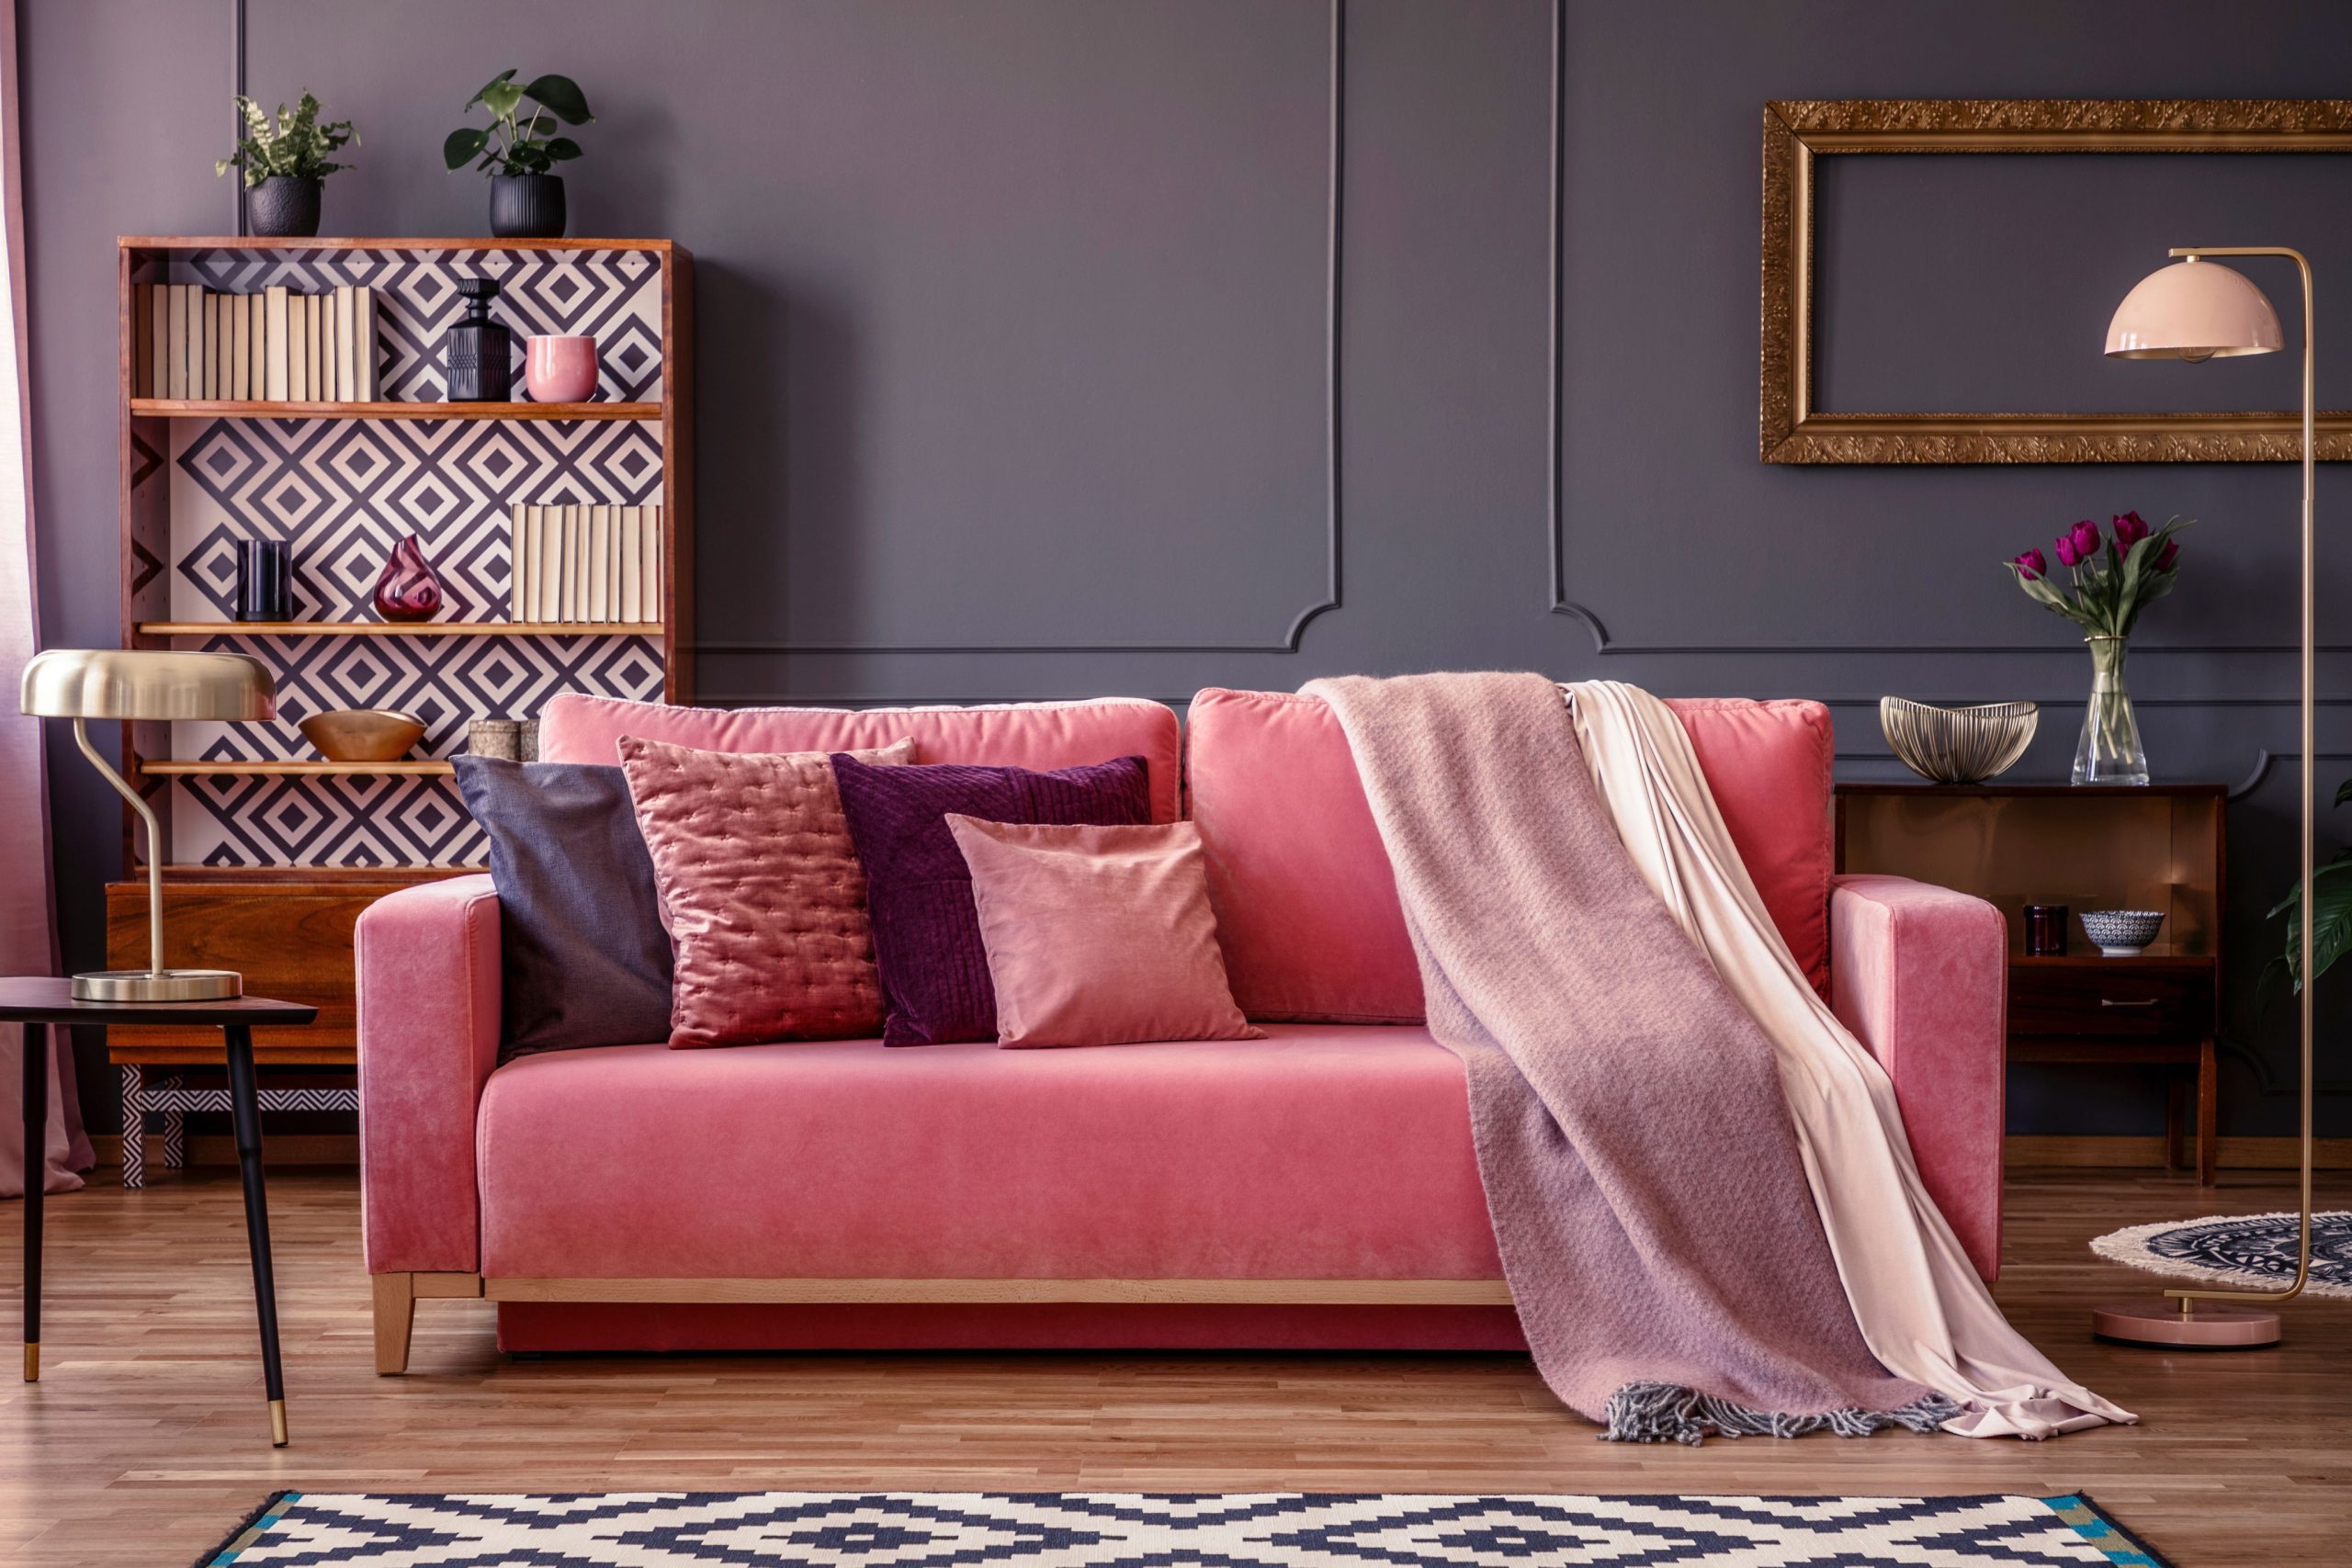 Splendid Pink Couch